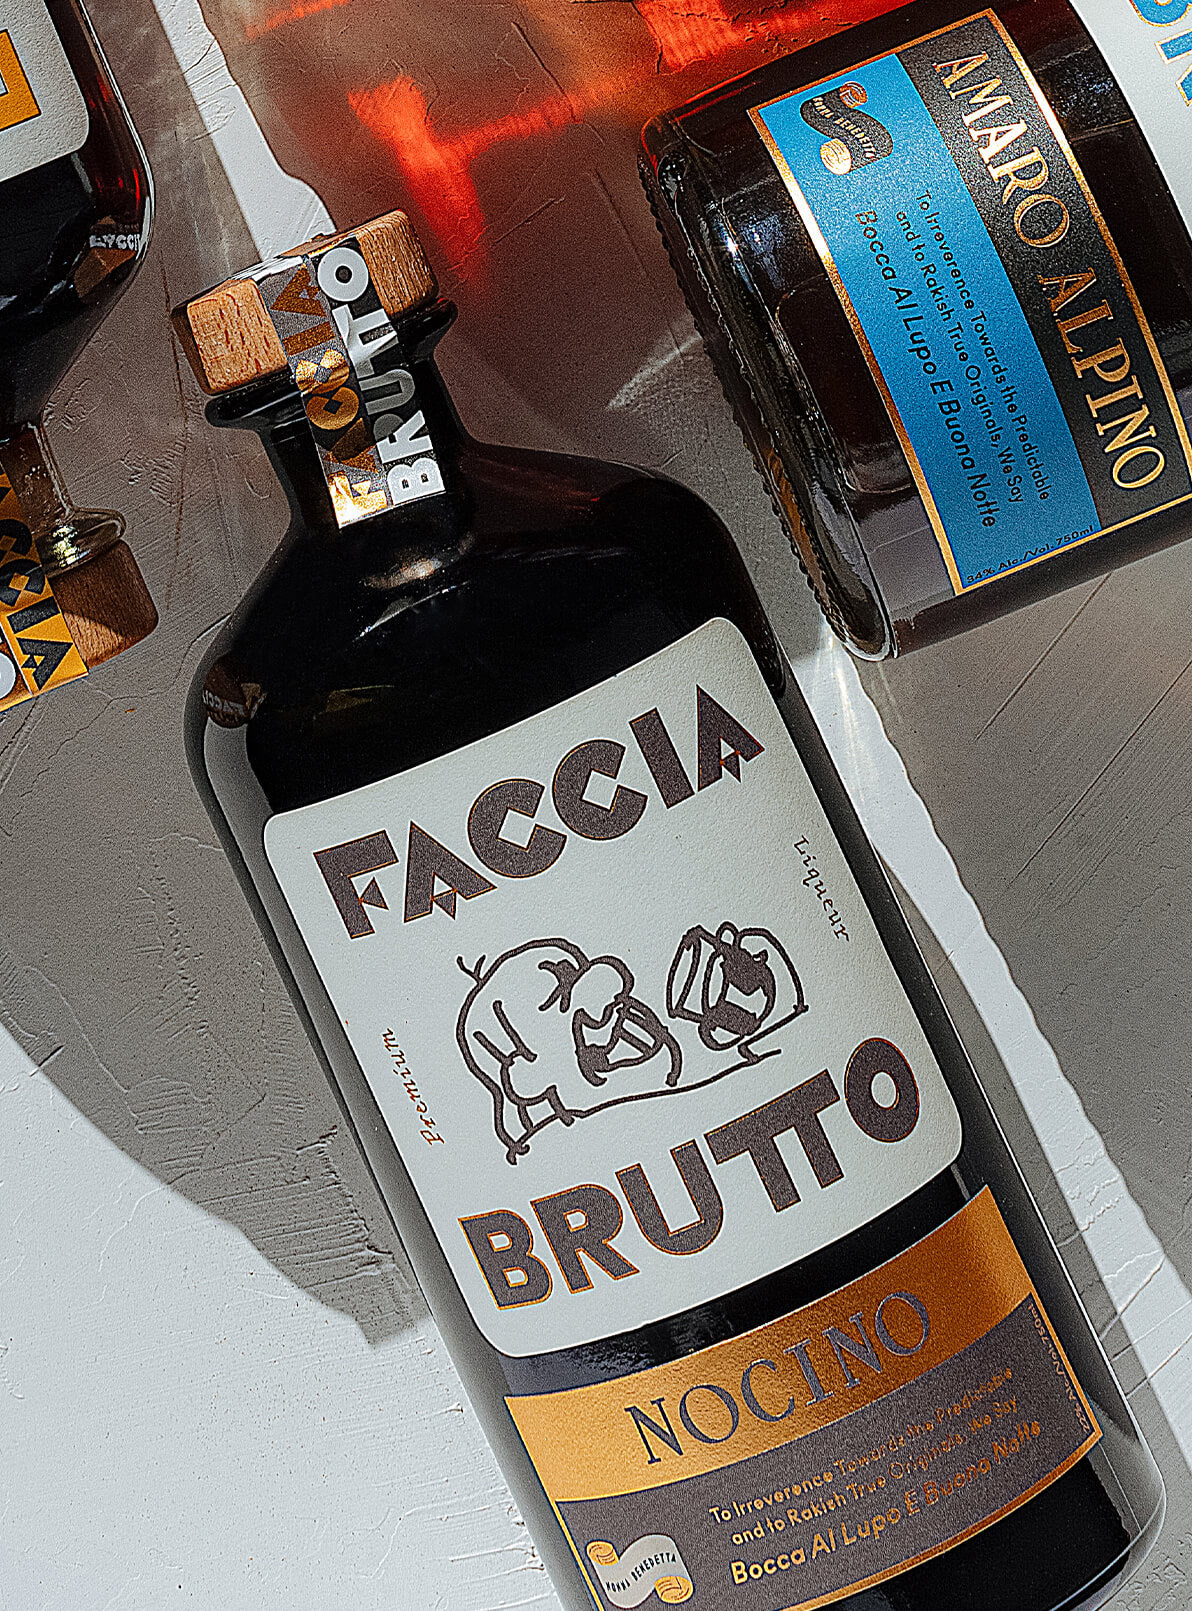 Faccia Brutto Nocino bottle laid down on white painted background